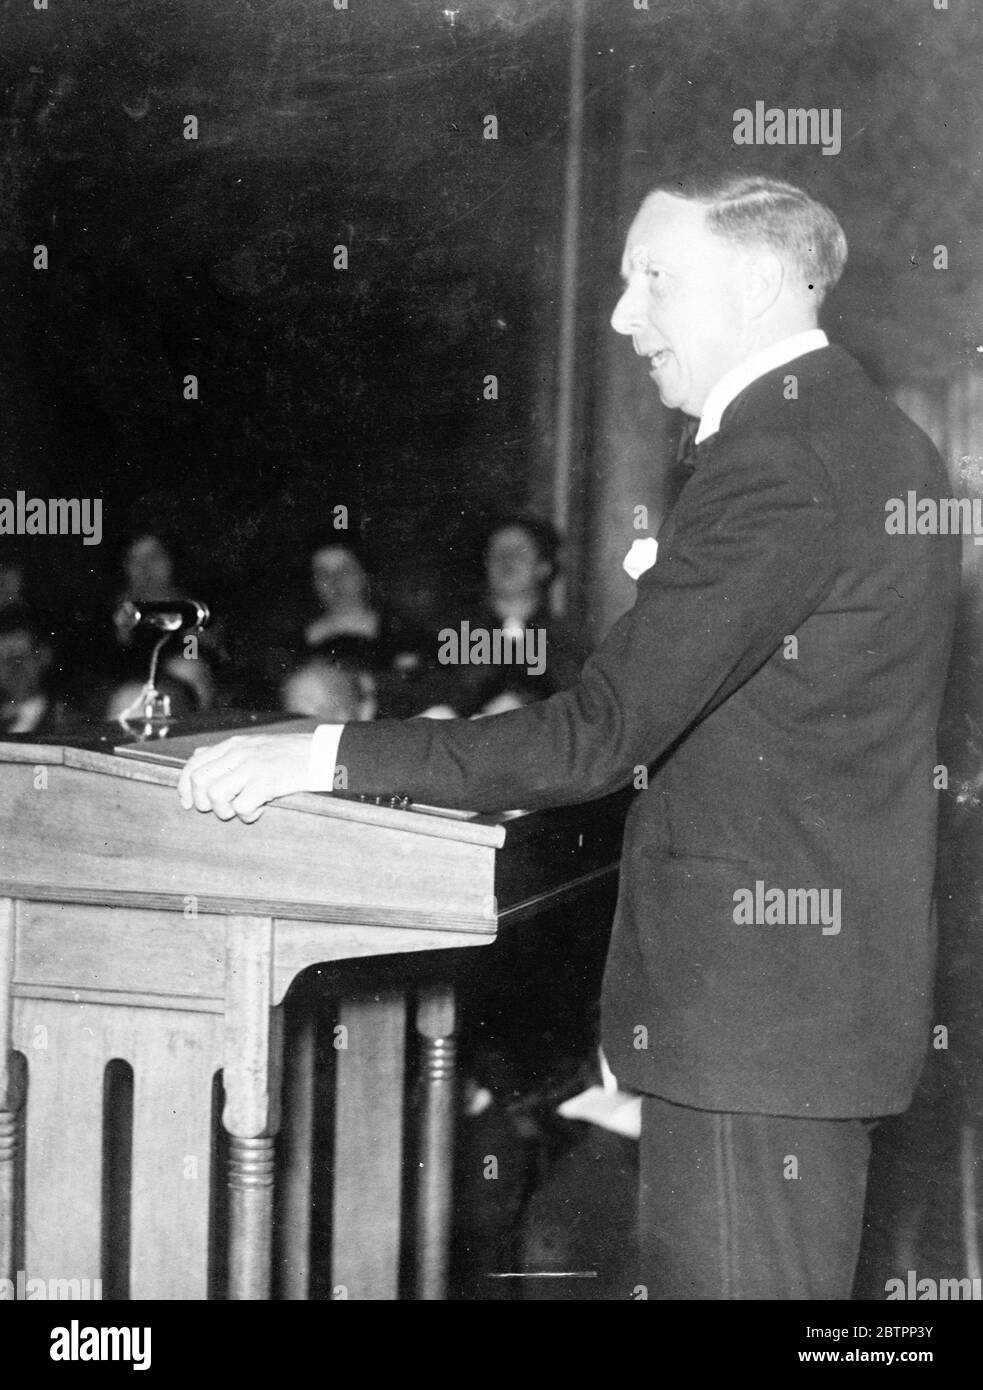 Dr Cronin lectures in Vienna. Dr A J Cronin, whose recently published book 'The Citadel' raised a storm in medical circles, photographed as he was giving a lecture in Vienna. He spoke on 'truth poetry in the modern story'. 10 February 1938 Stock Photo